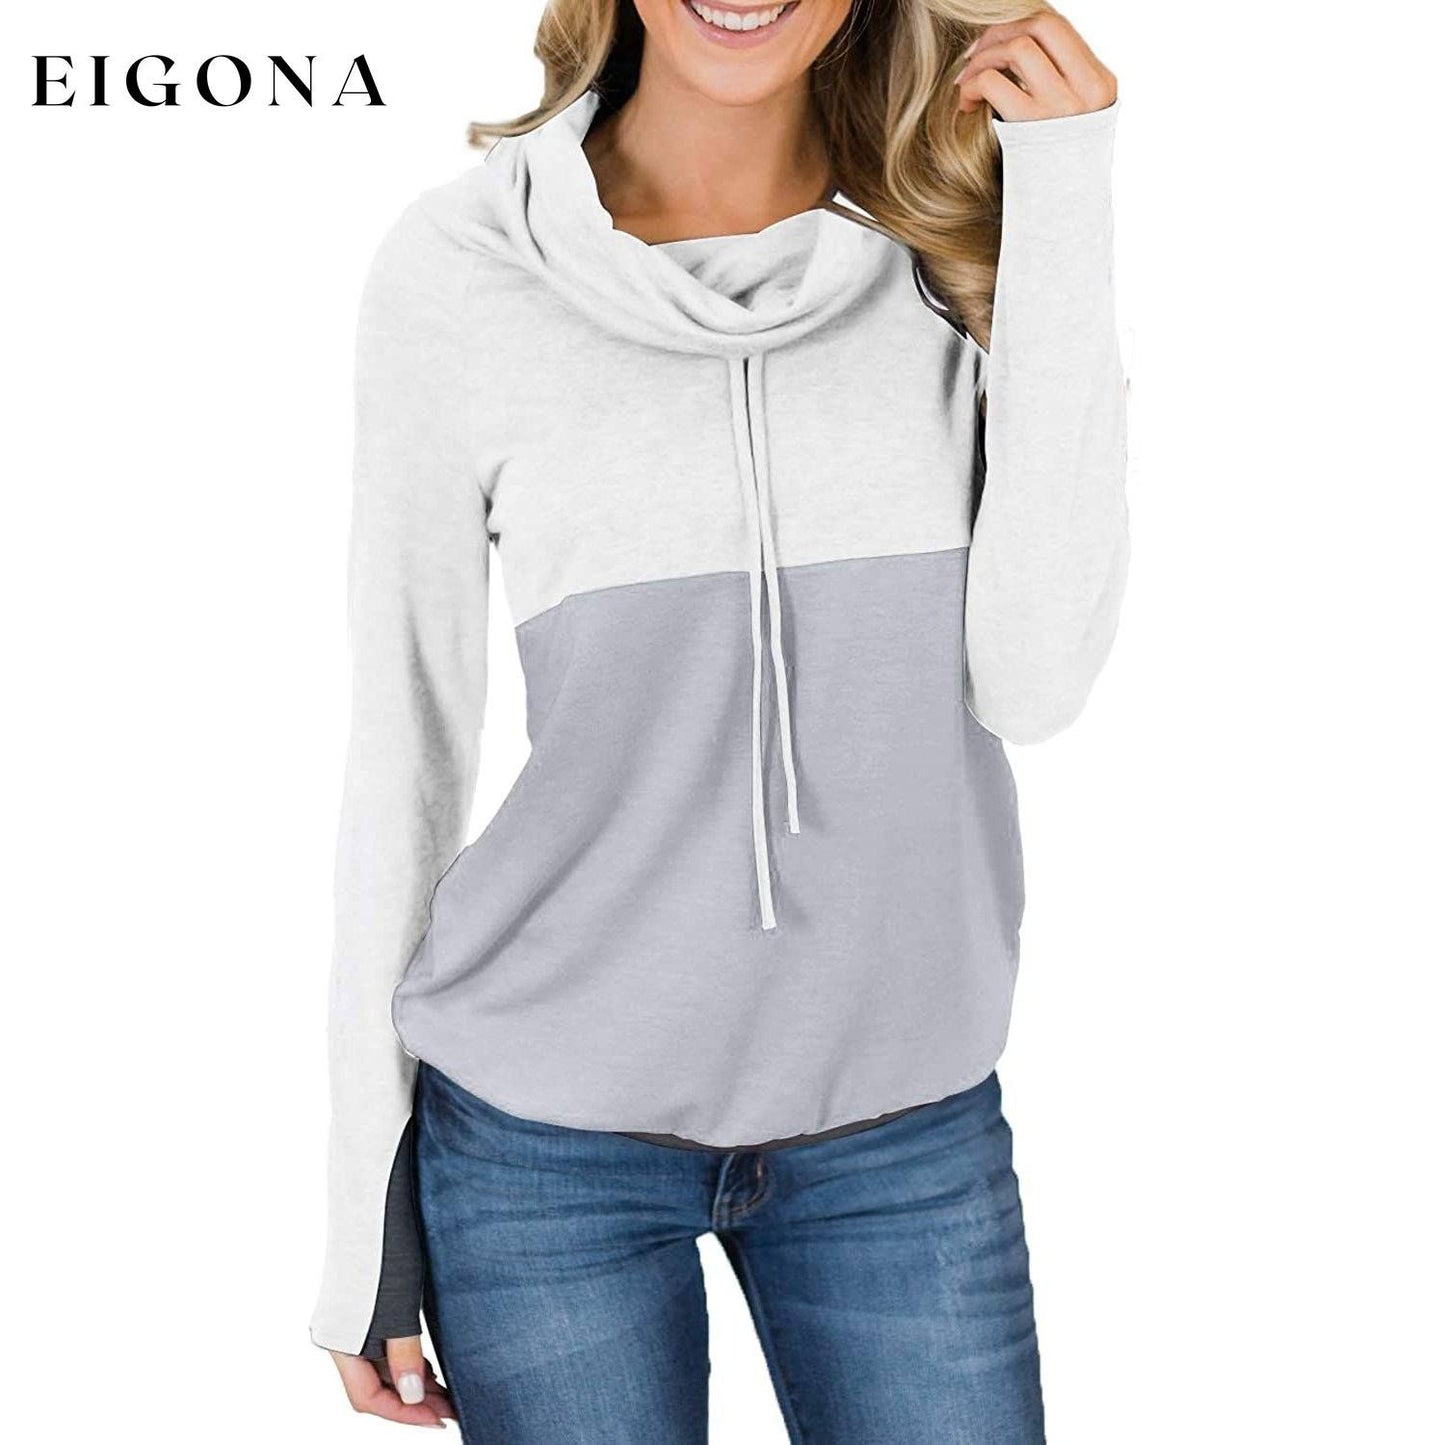 Women Cowl Neck Casual Tunic Sweatshirts Drawstring Long Sleeve Color Block Patchwork Pullover Tops Gray __stock:50 clothes refund_fee:1200 tops